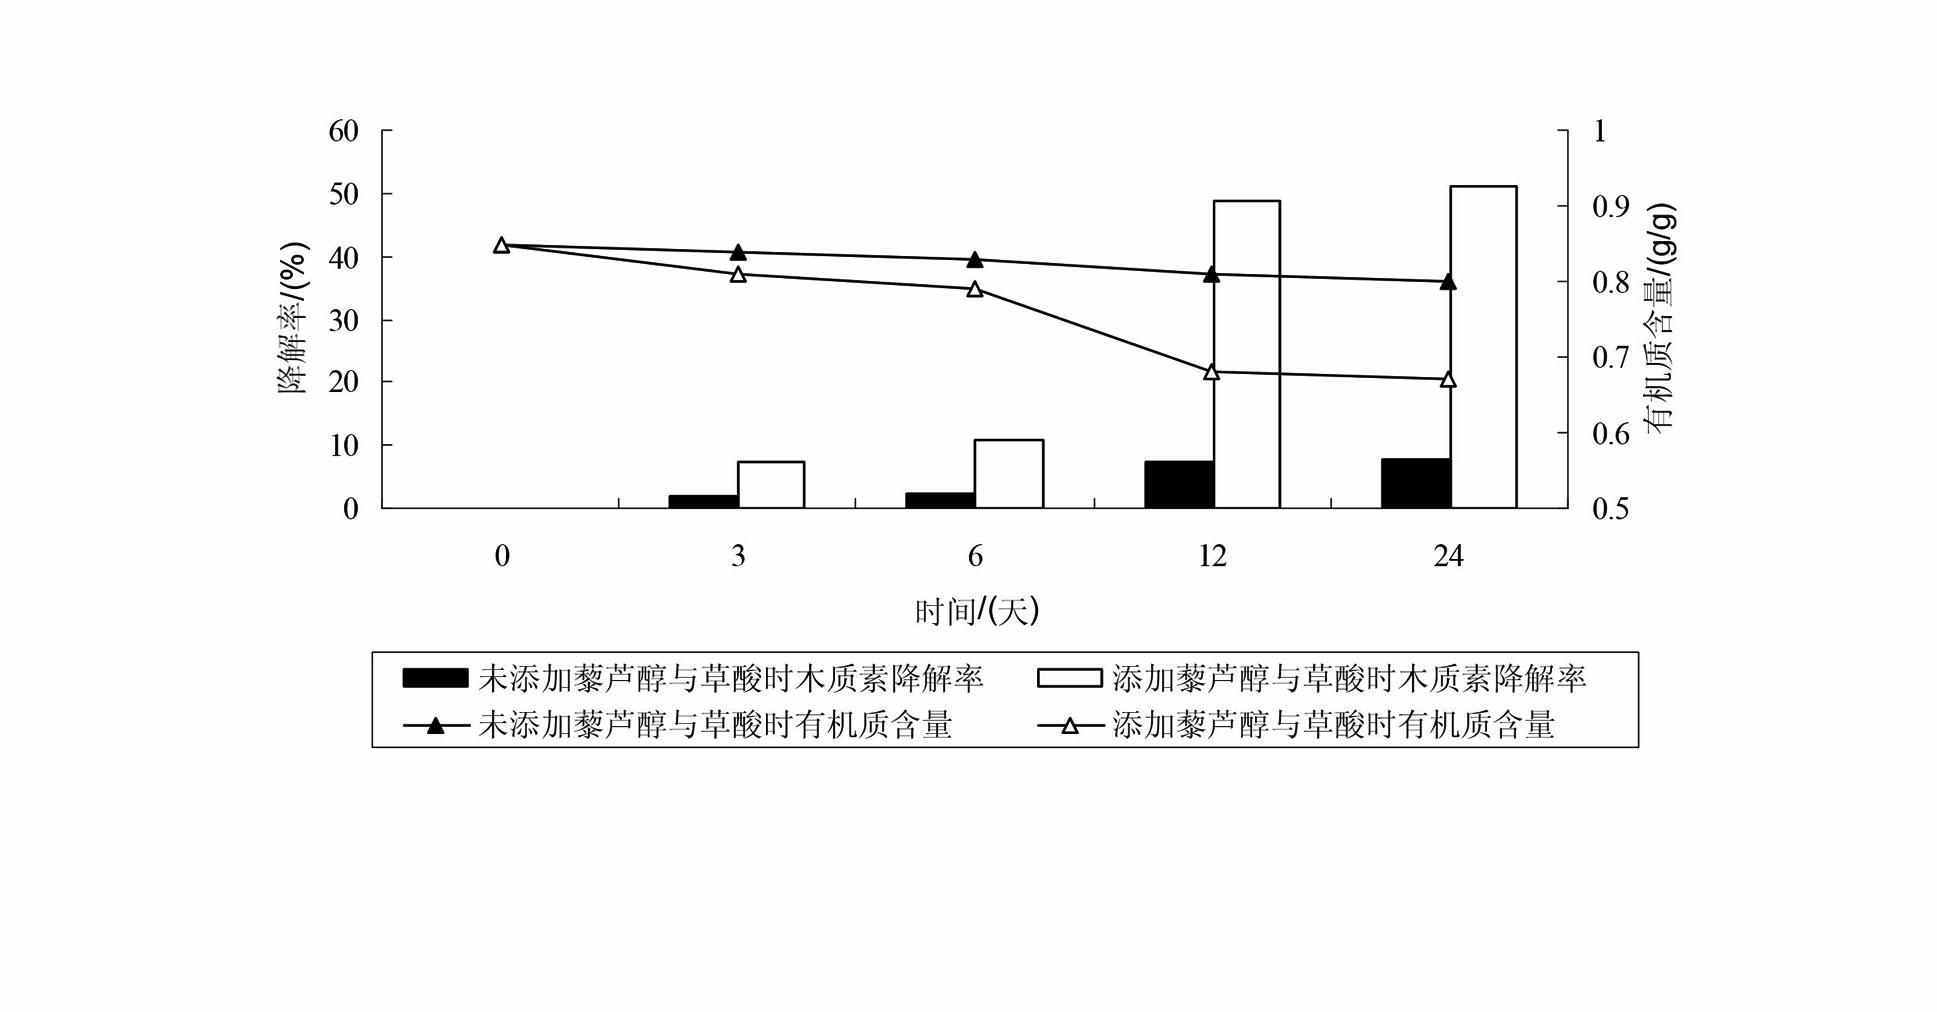 Method for promoting composite enzymes by utilizing resveratrol and oxalic acid to catalytically degrade rice straws